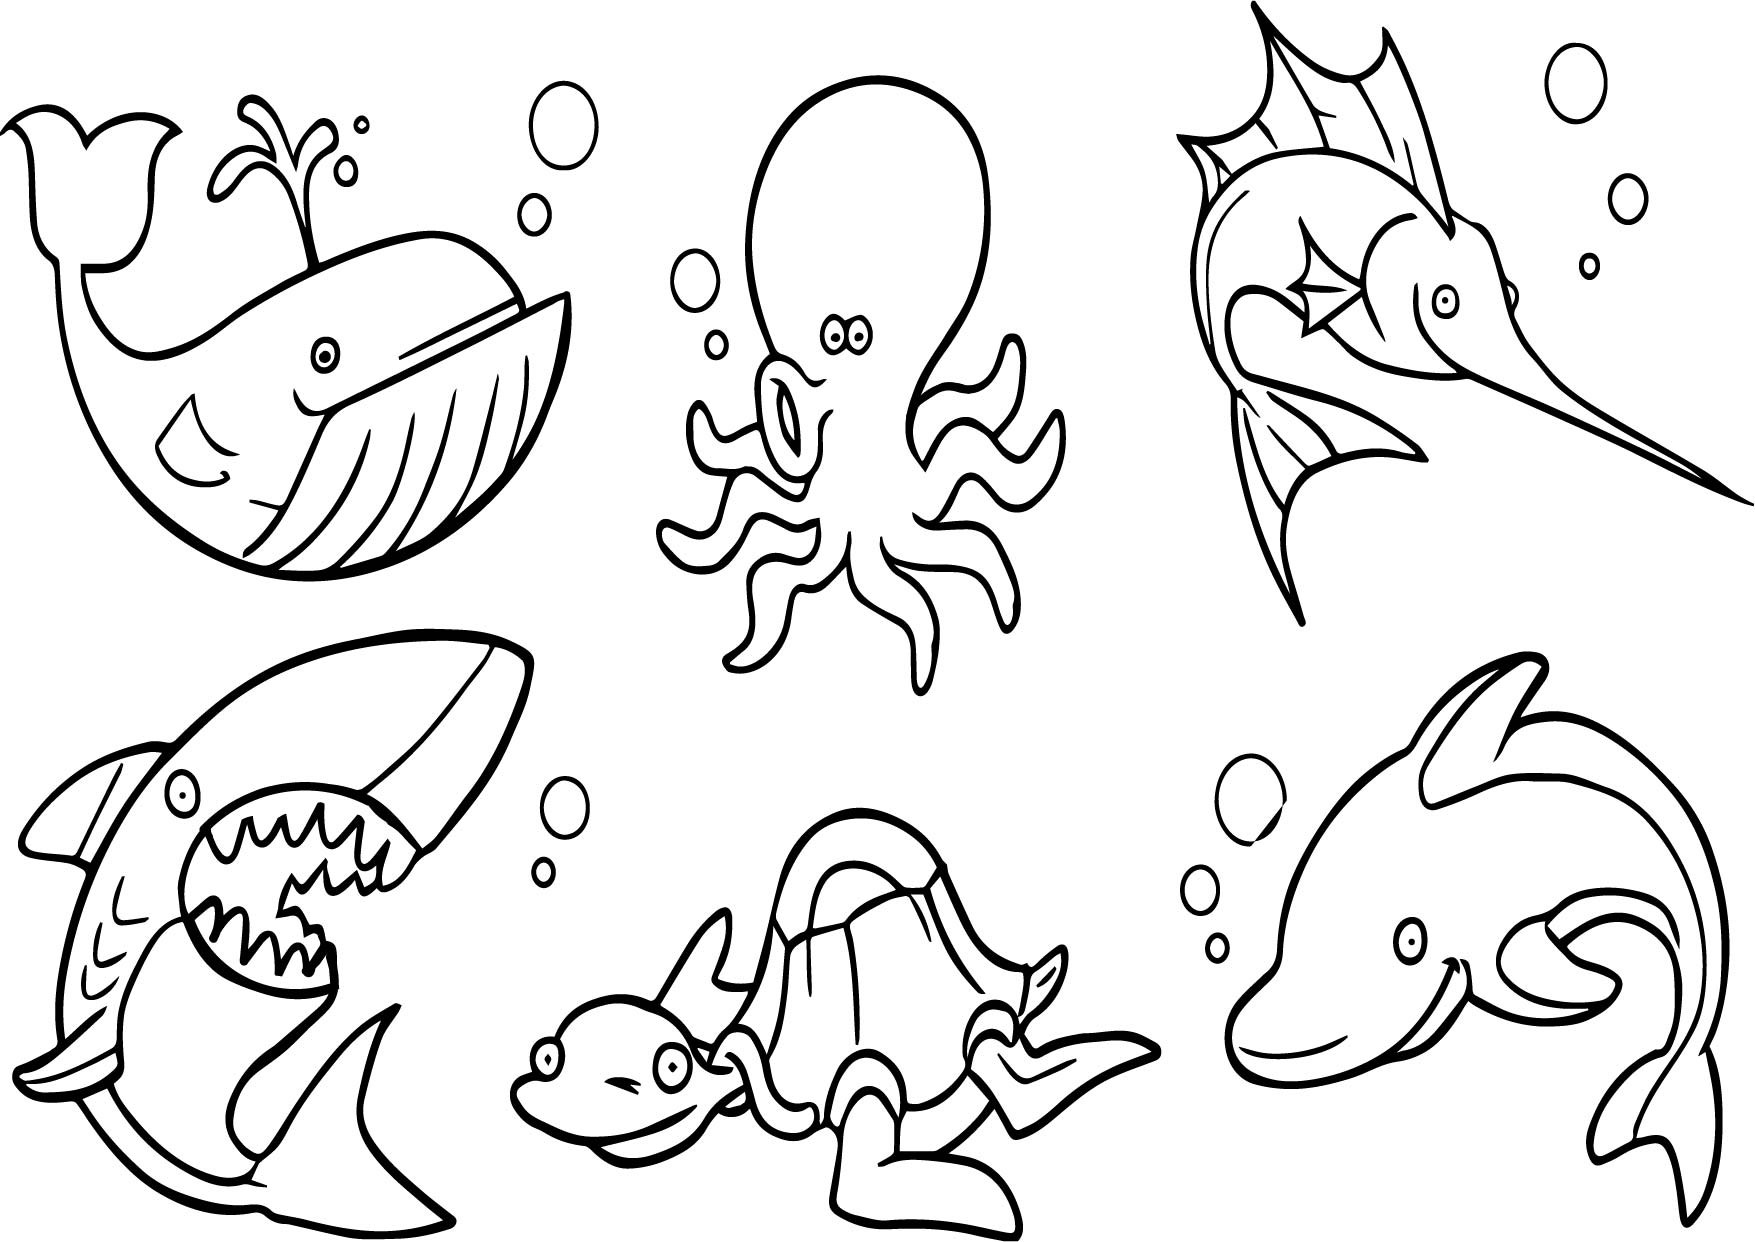 Underwater Coloring Book Pages
 Underwater Animals Coloring Page